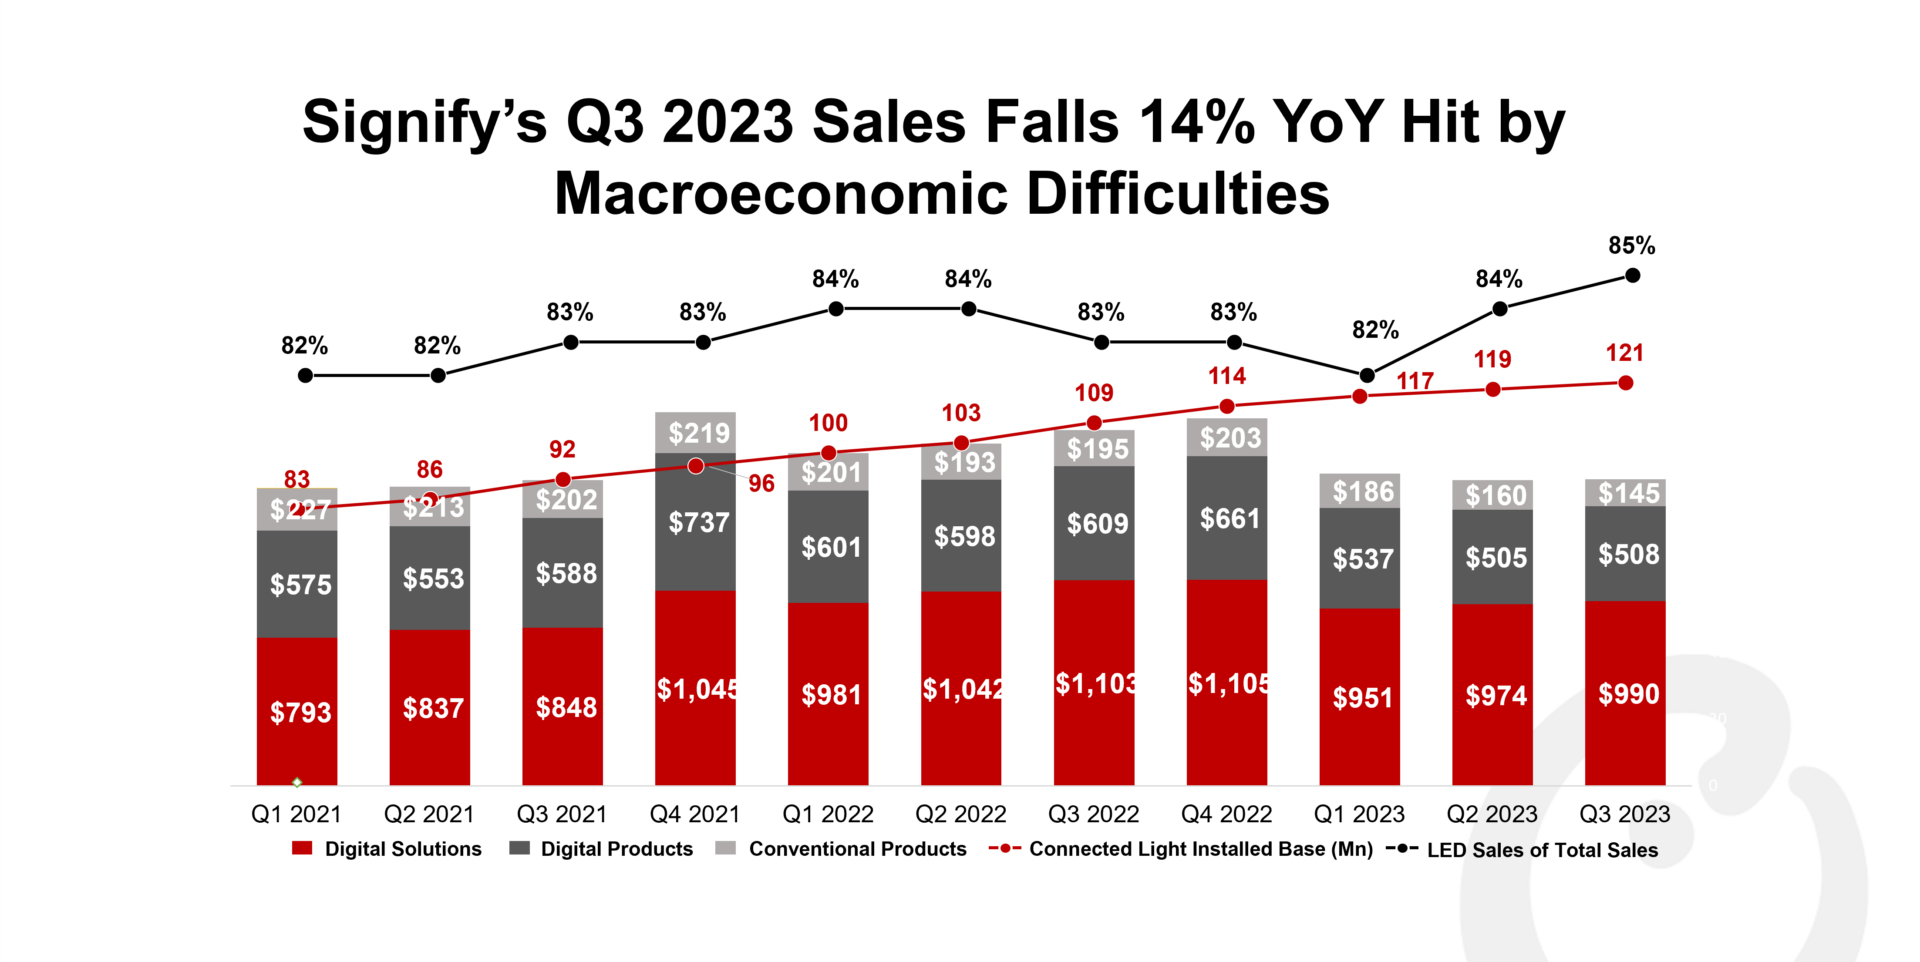 Signify’s Q3 2023 Sales Falls 14% YoY Hit by Macroeconomic Difficulties